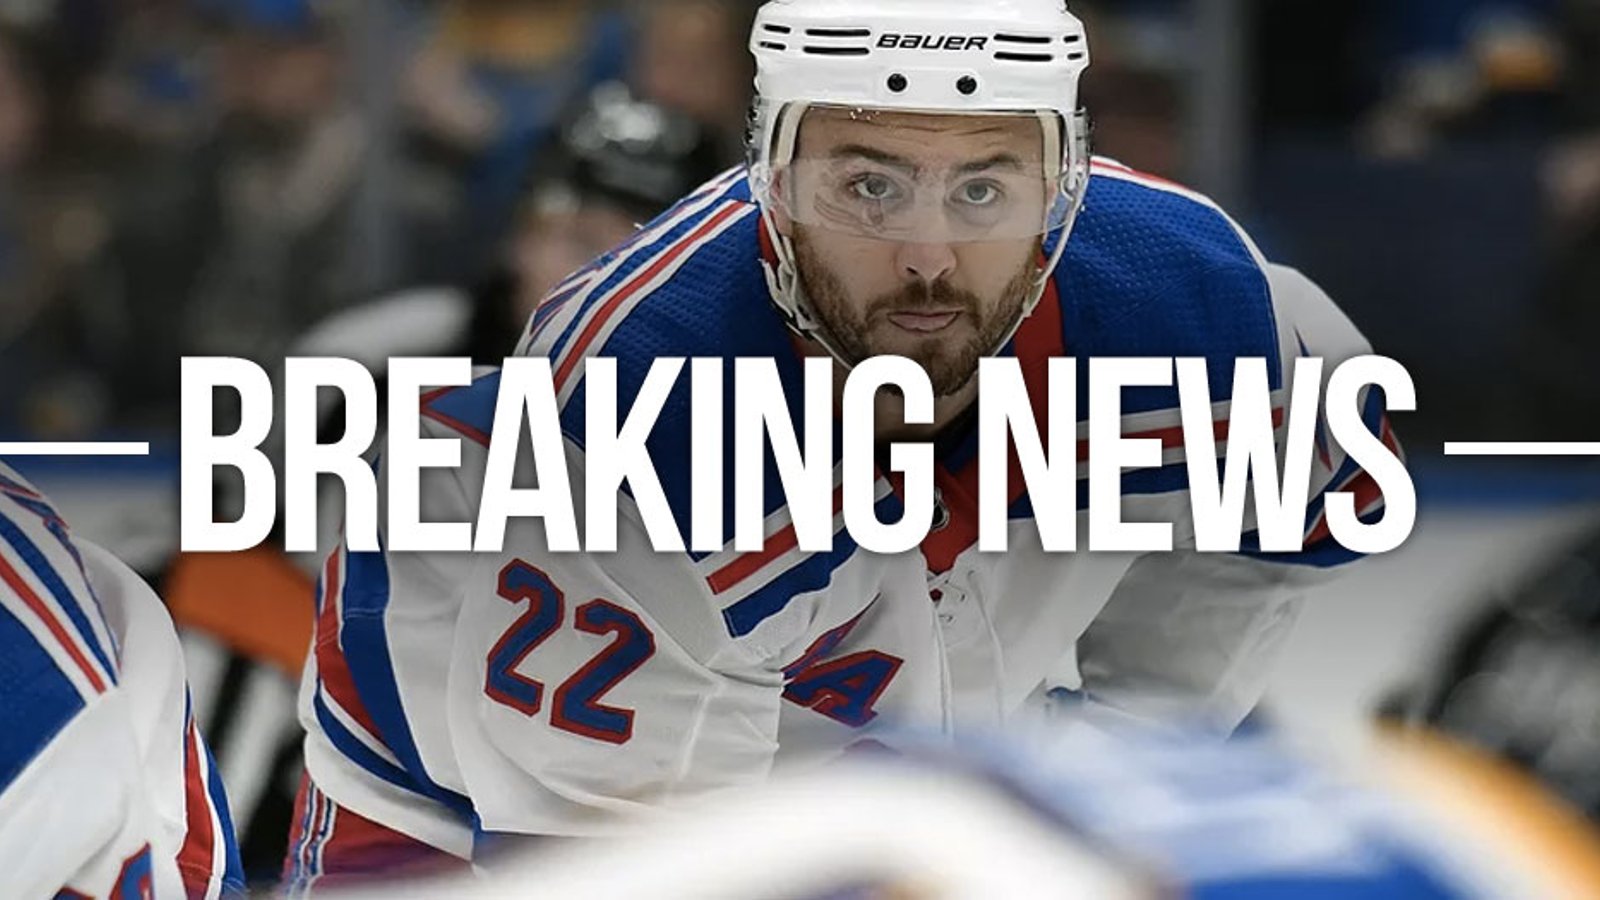 Shattenkirk already gets a new contract in the NHL! 